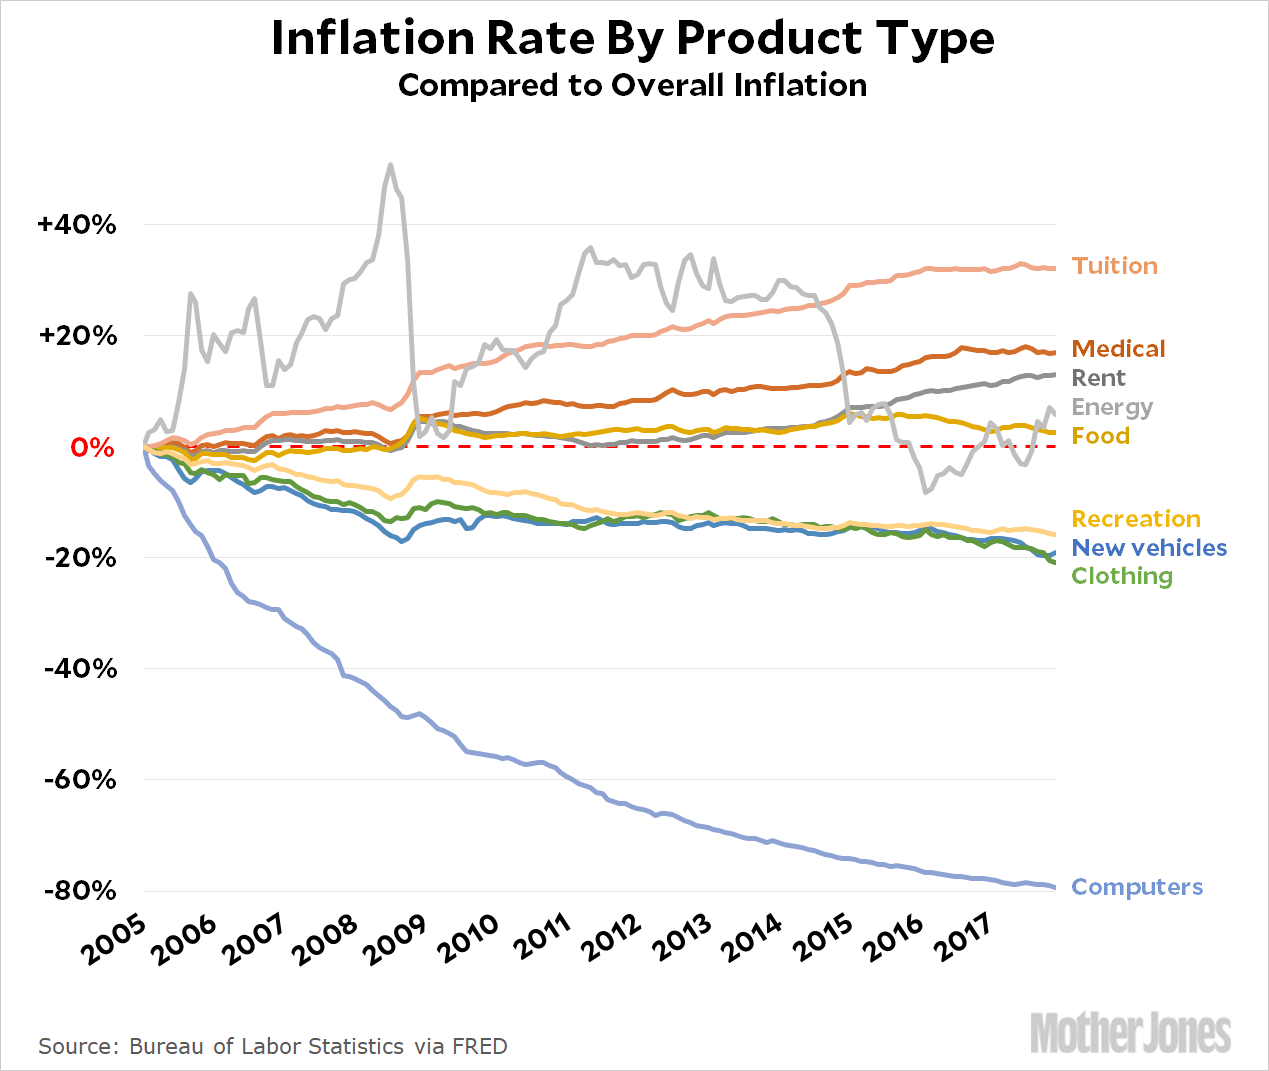 Raw Data Inflation Rate for Different Products Mother Jones